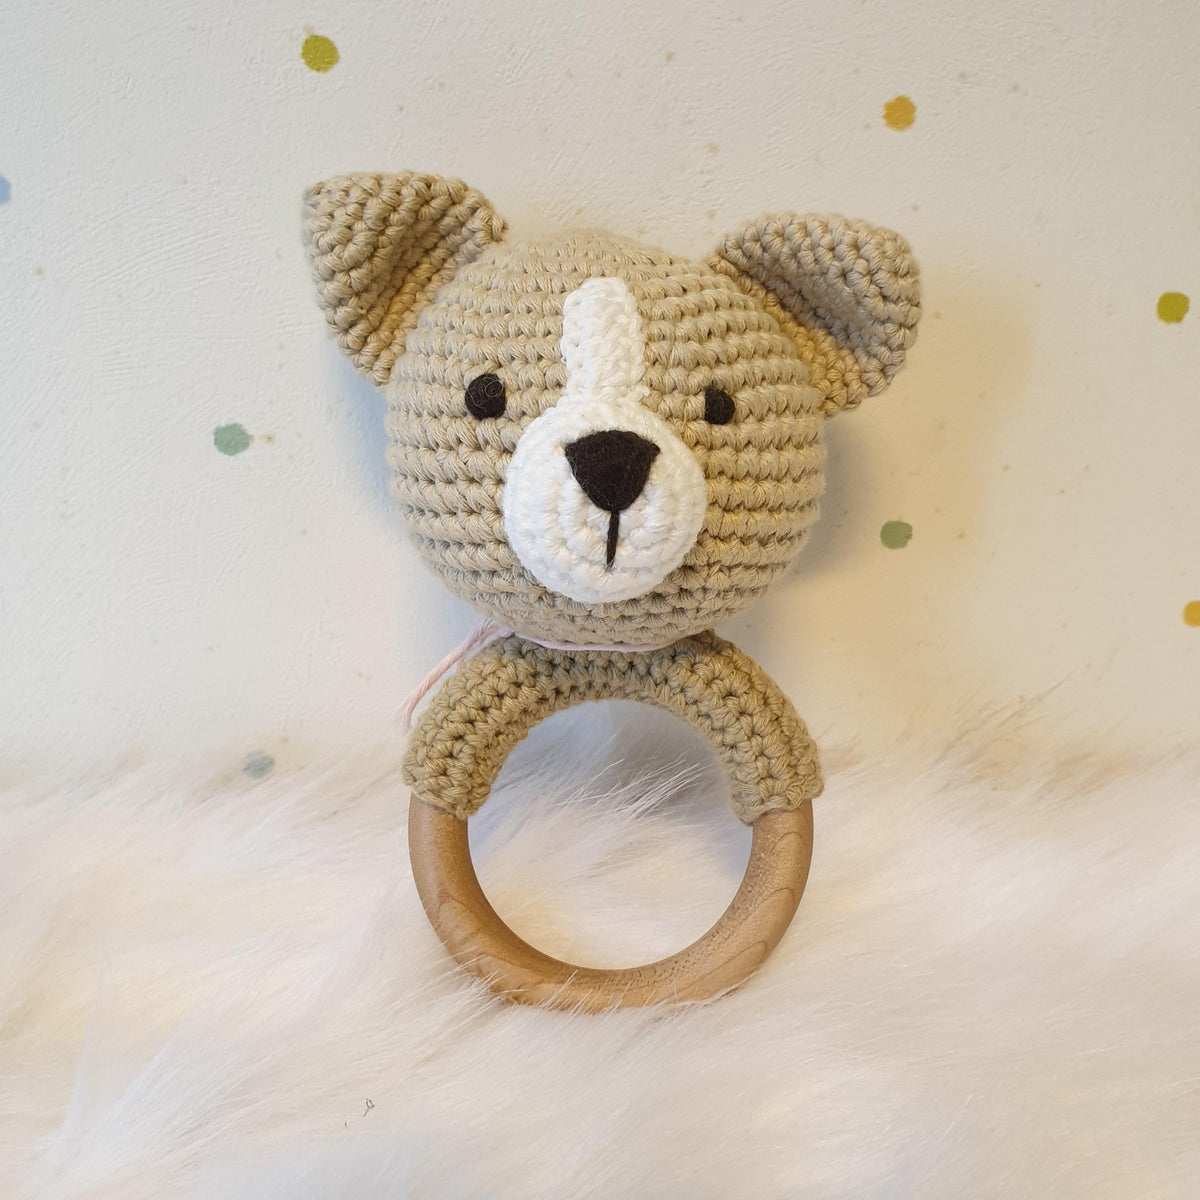 May's Hand Dog Dory Round Rattle Crochet - Kids Haven